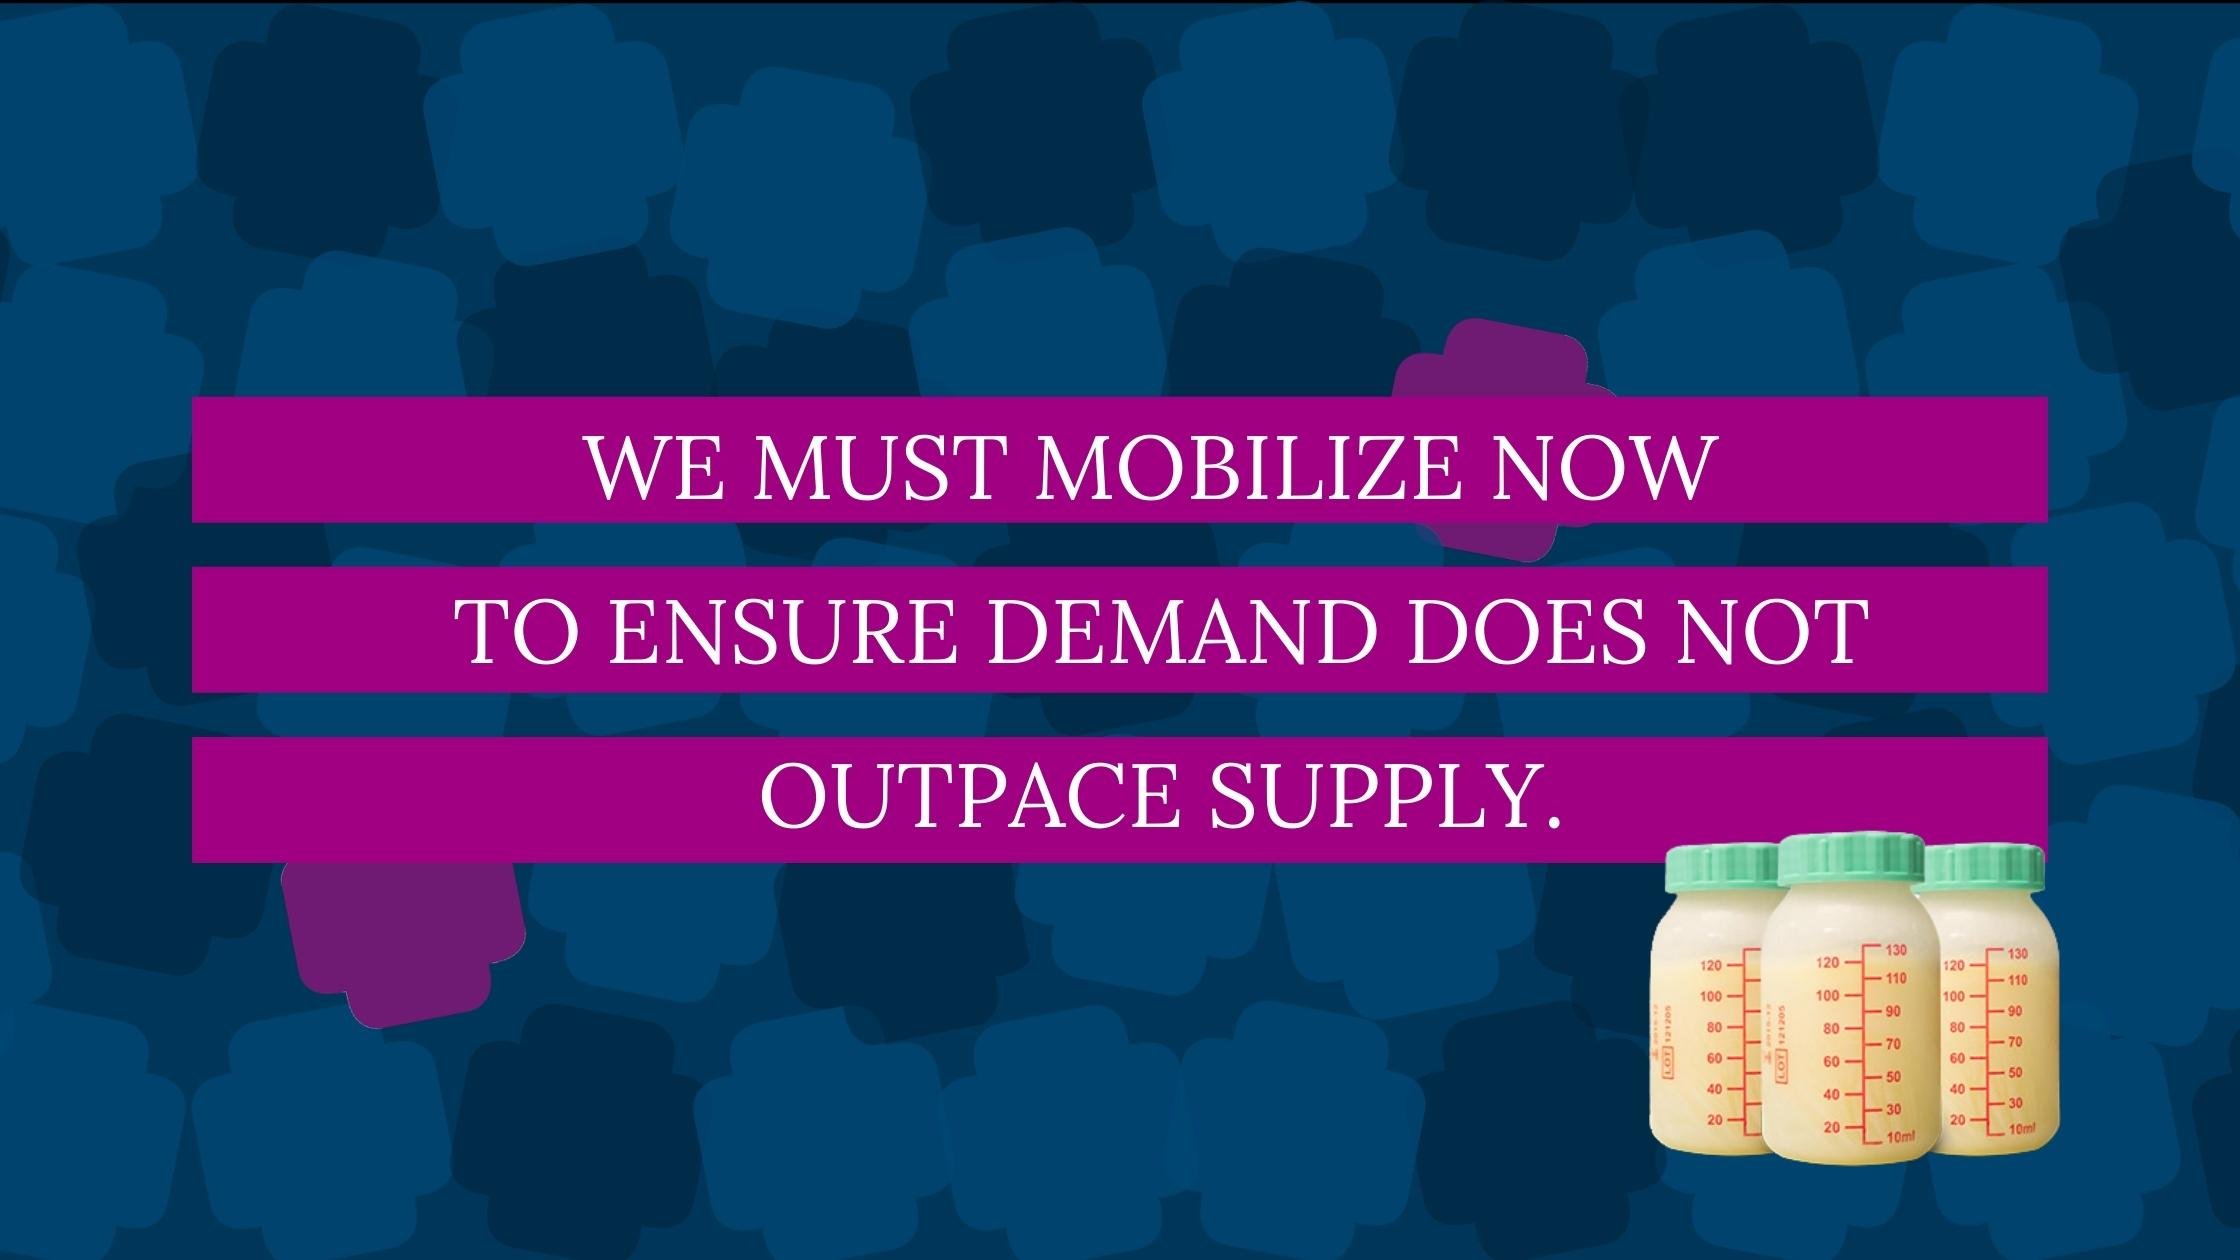 We must mobilize now to ensure demand does not outpace supply.